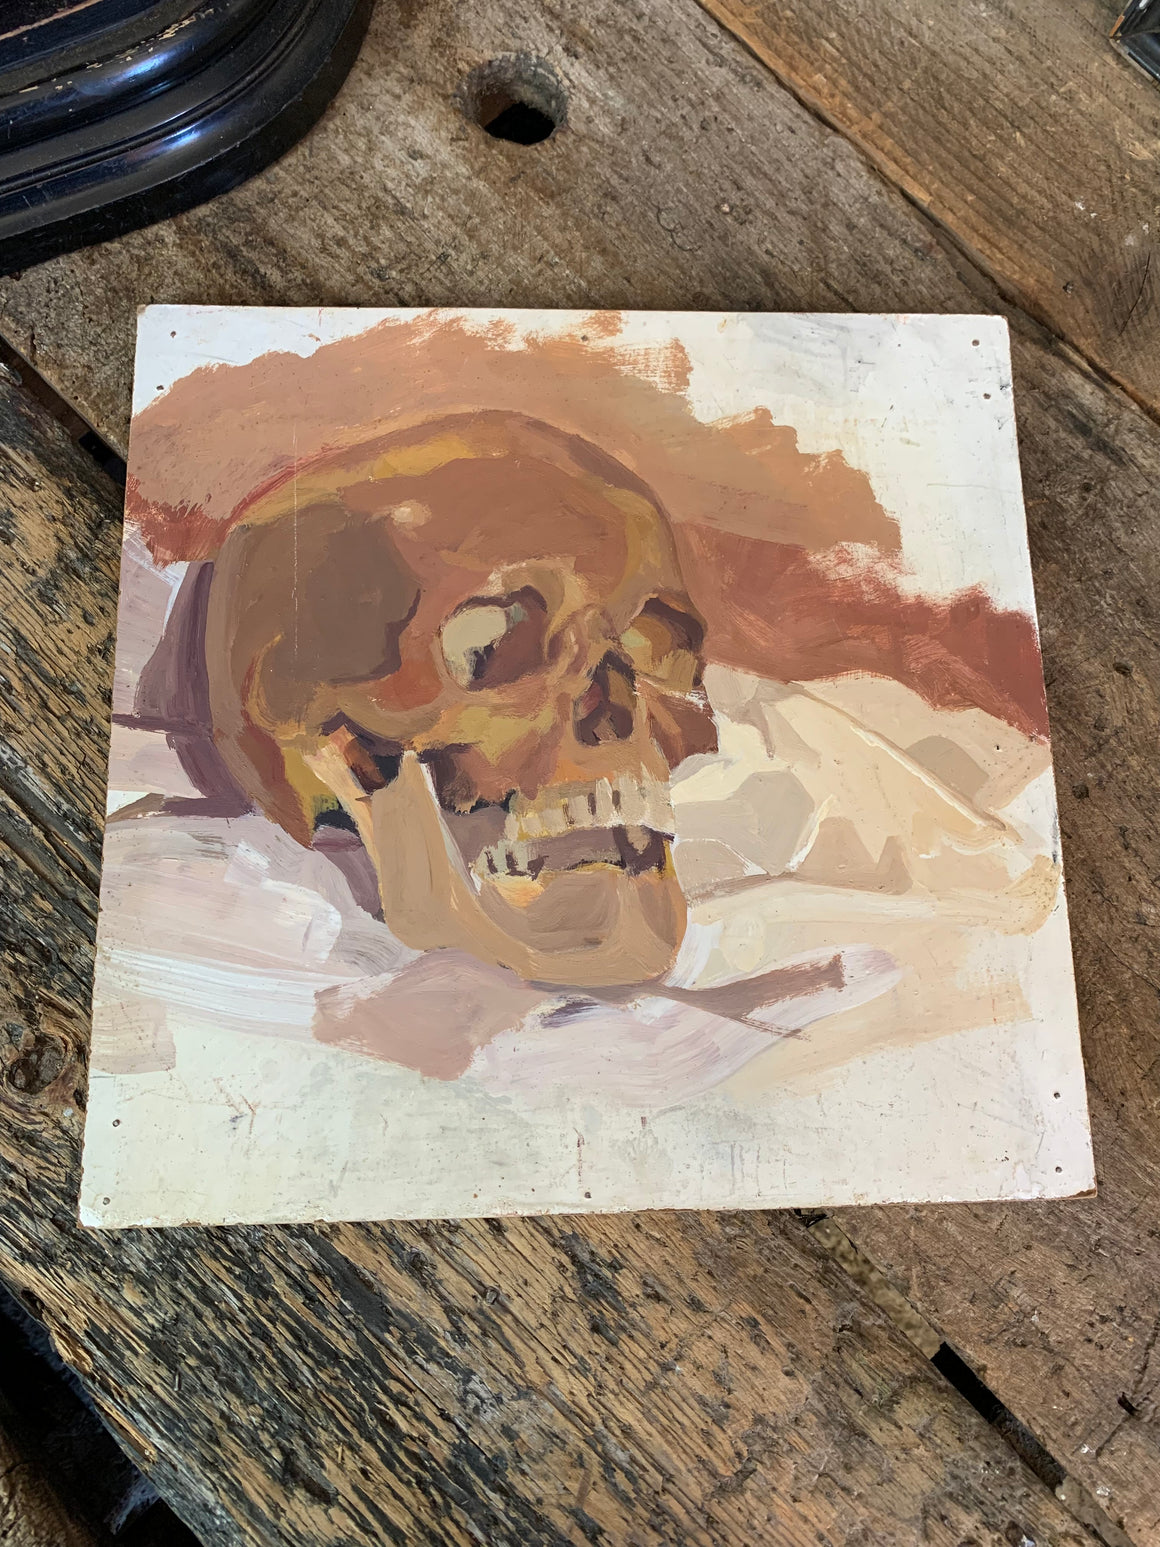 A skull study oil painting